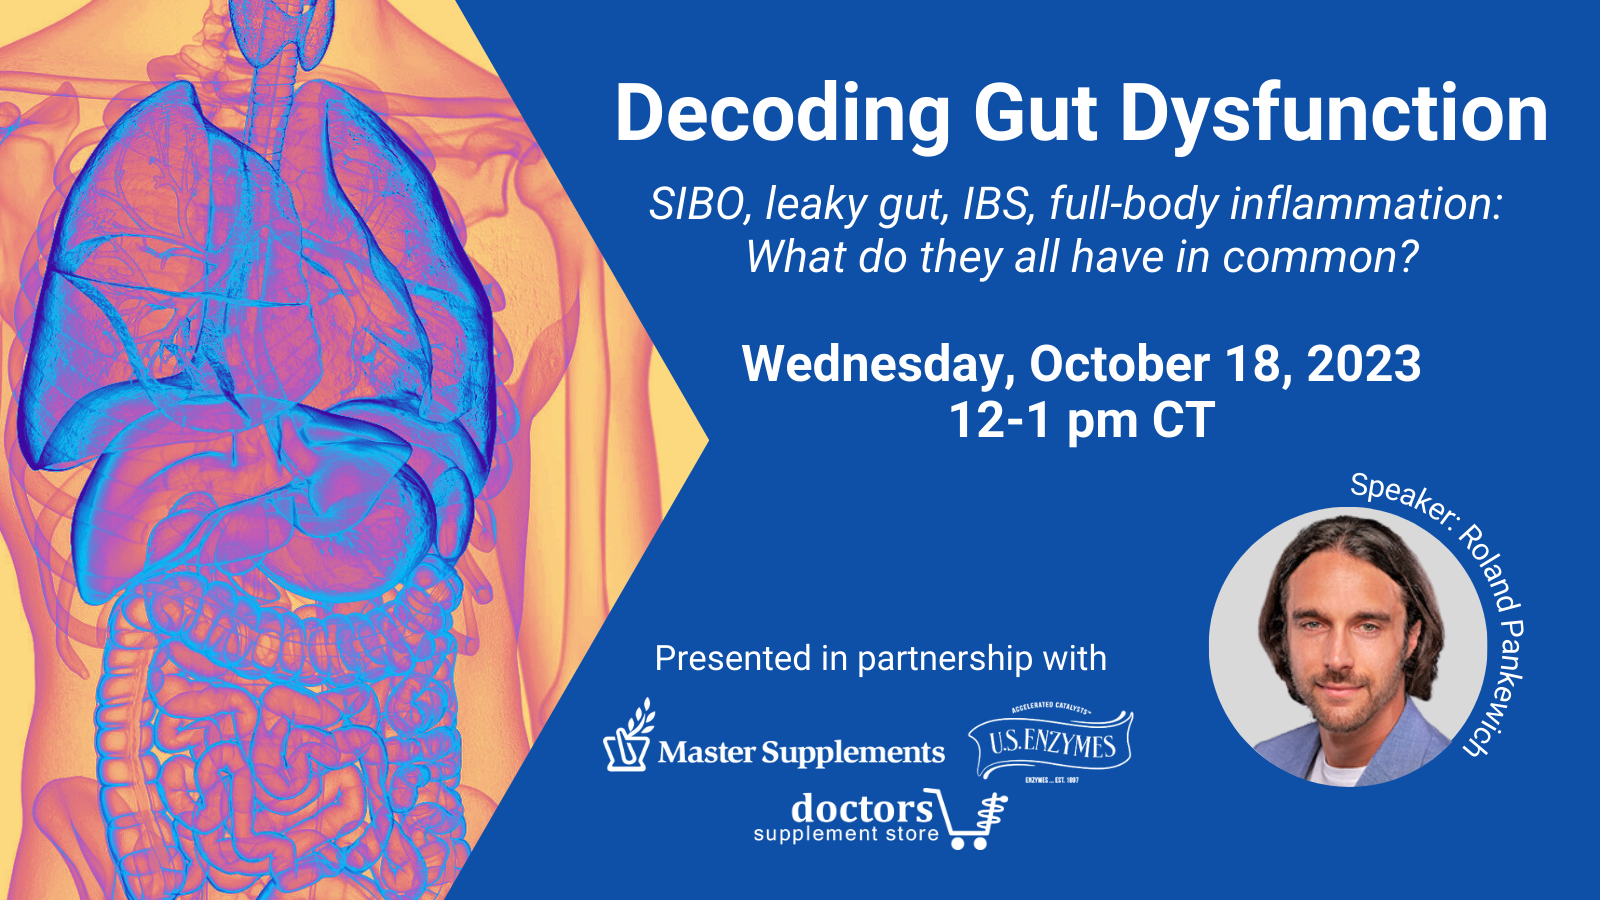 Decoding Gut Dysfunction - SIBO, leaky gut, IBS, full-body inflammation: What do they all have in common?